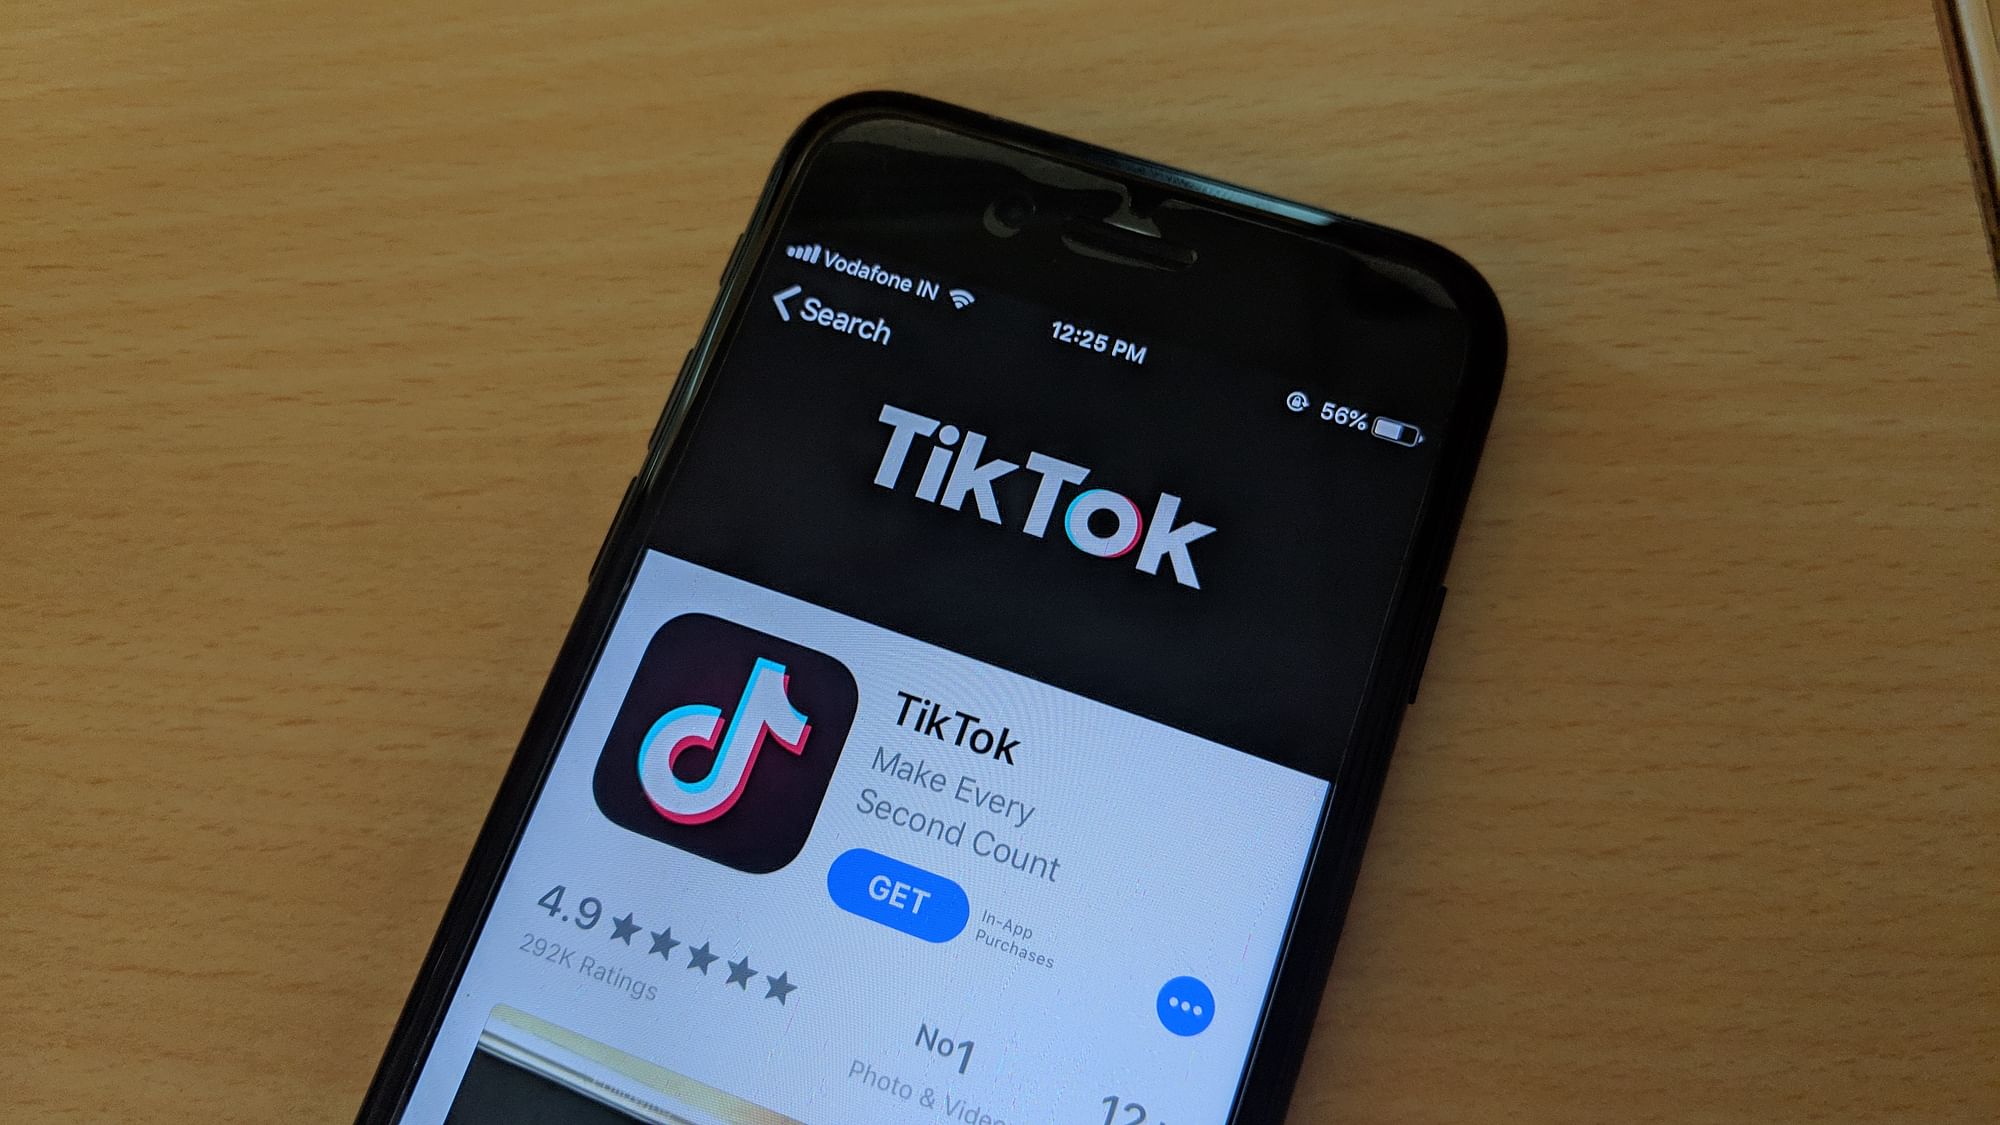 TikTok has been taken down from Android and iOS for Indian users.